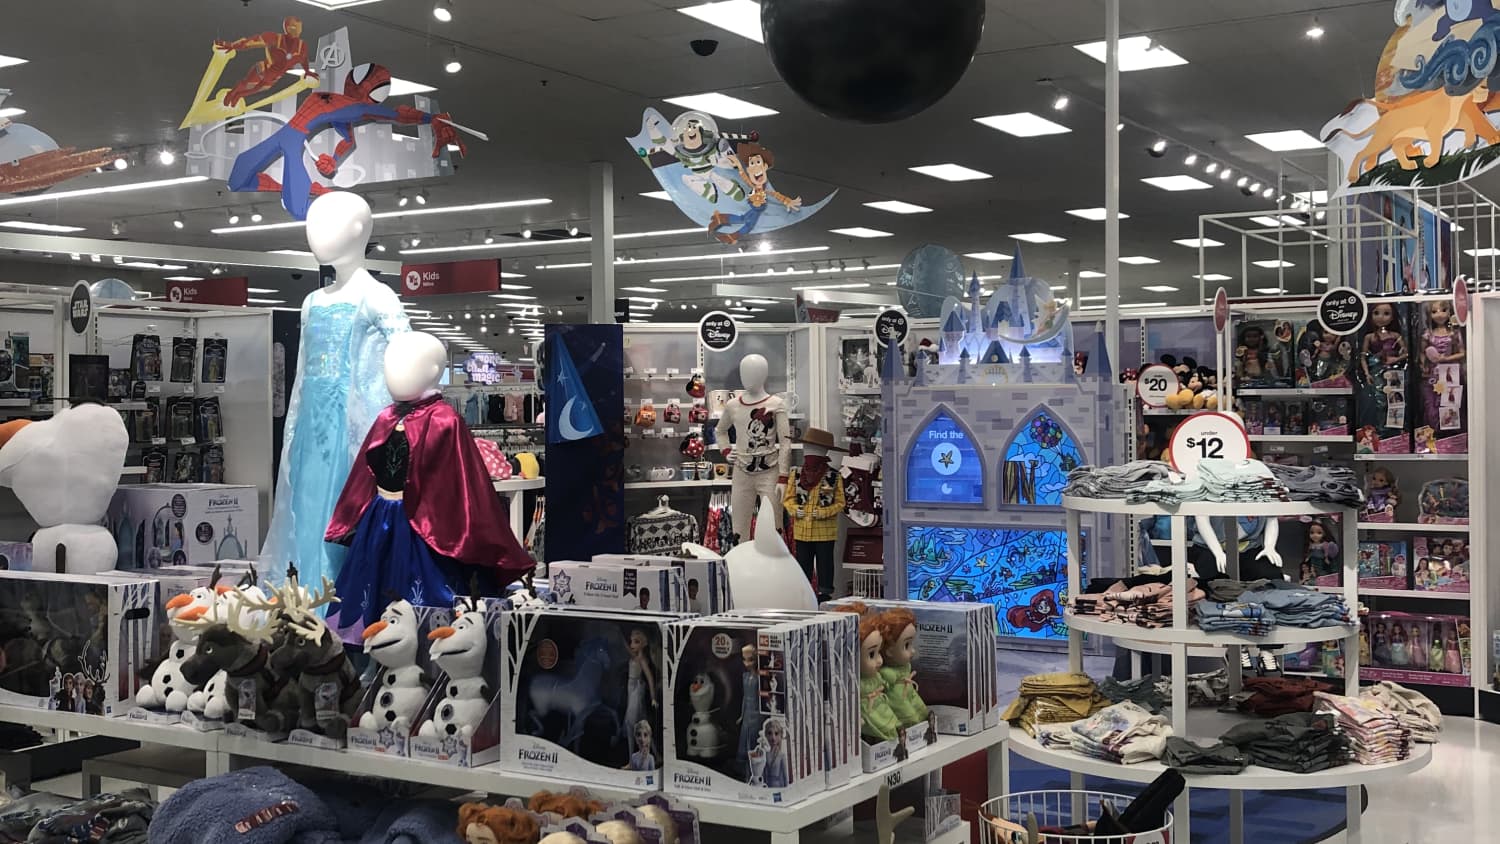 I Visited a Disney Store Inside Target and It Was Magical